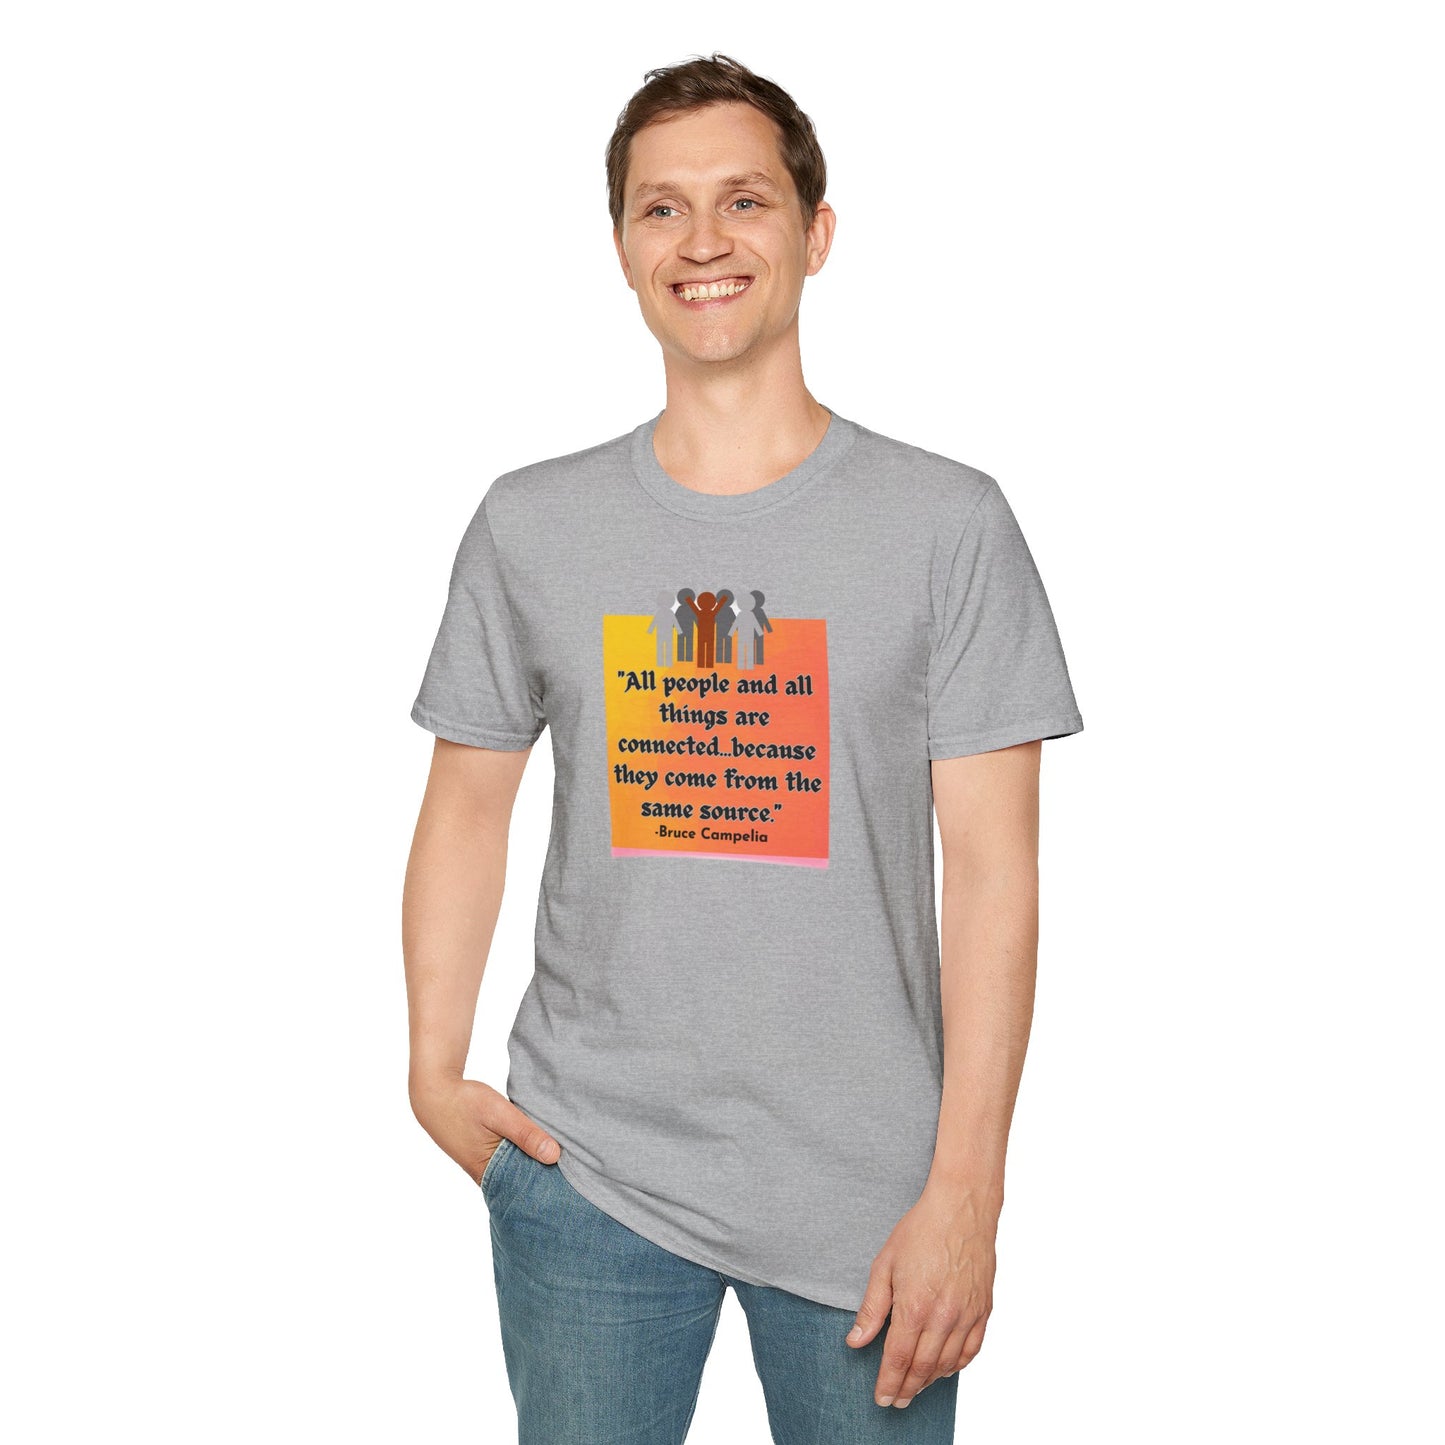 Light Passers Marketplace All People are connected orange plaque Unisex Soft Cotton T-shirt Inspirational Messages, Simple Messages, Mental Health, Diversity